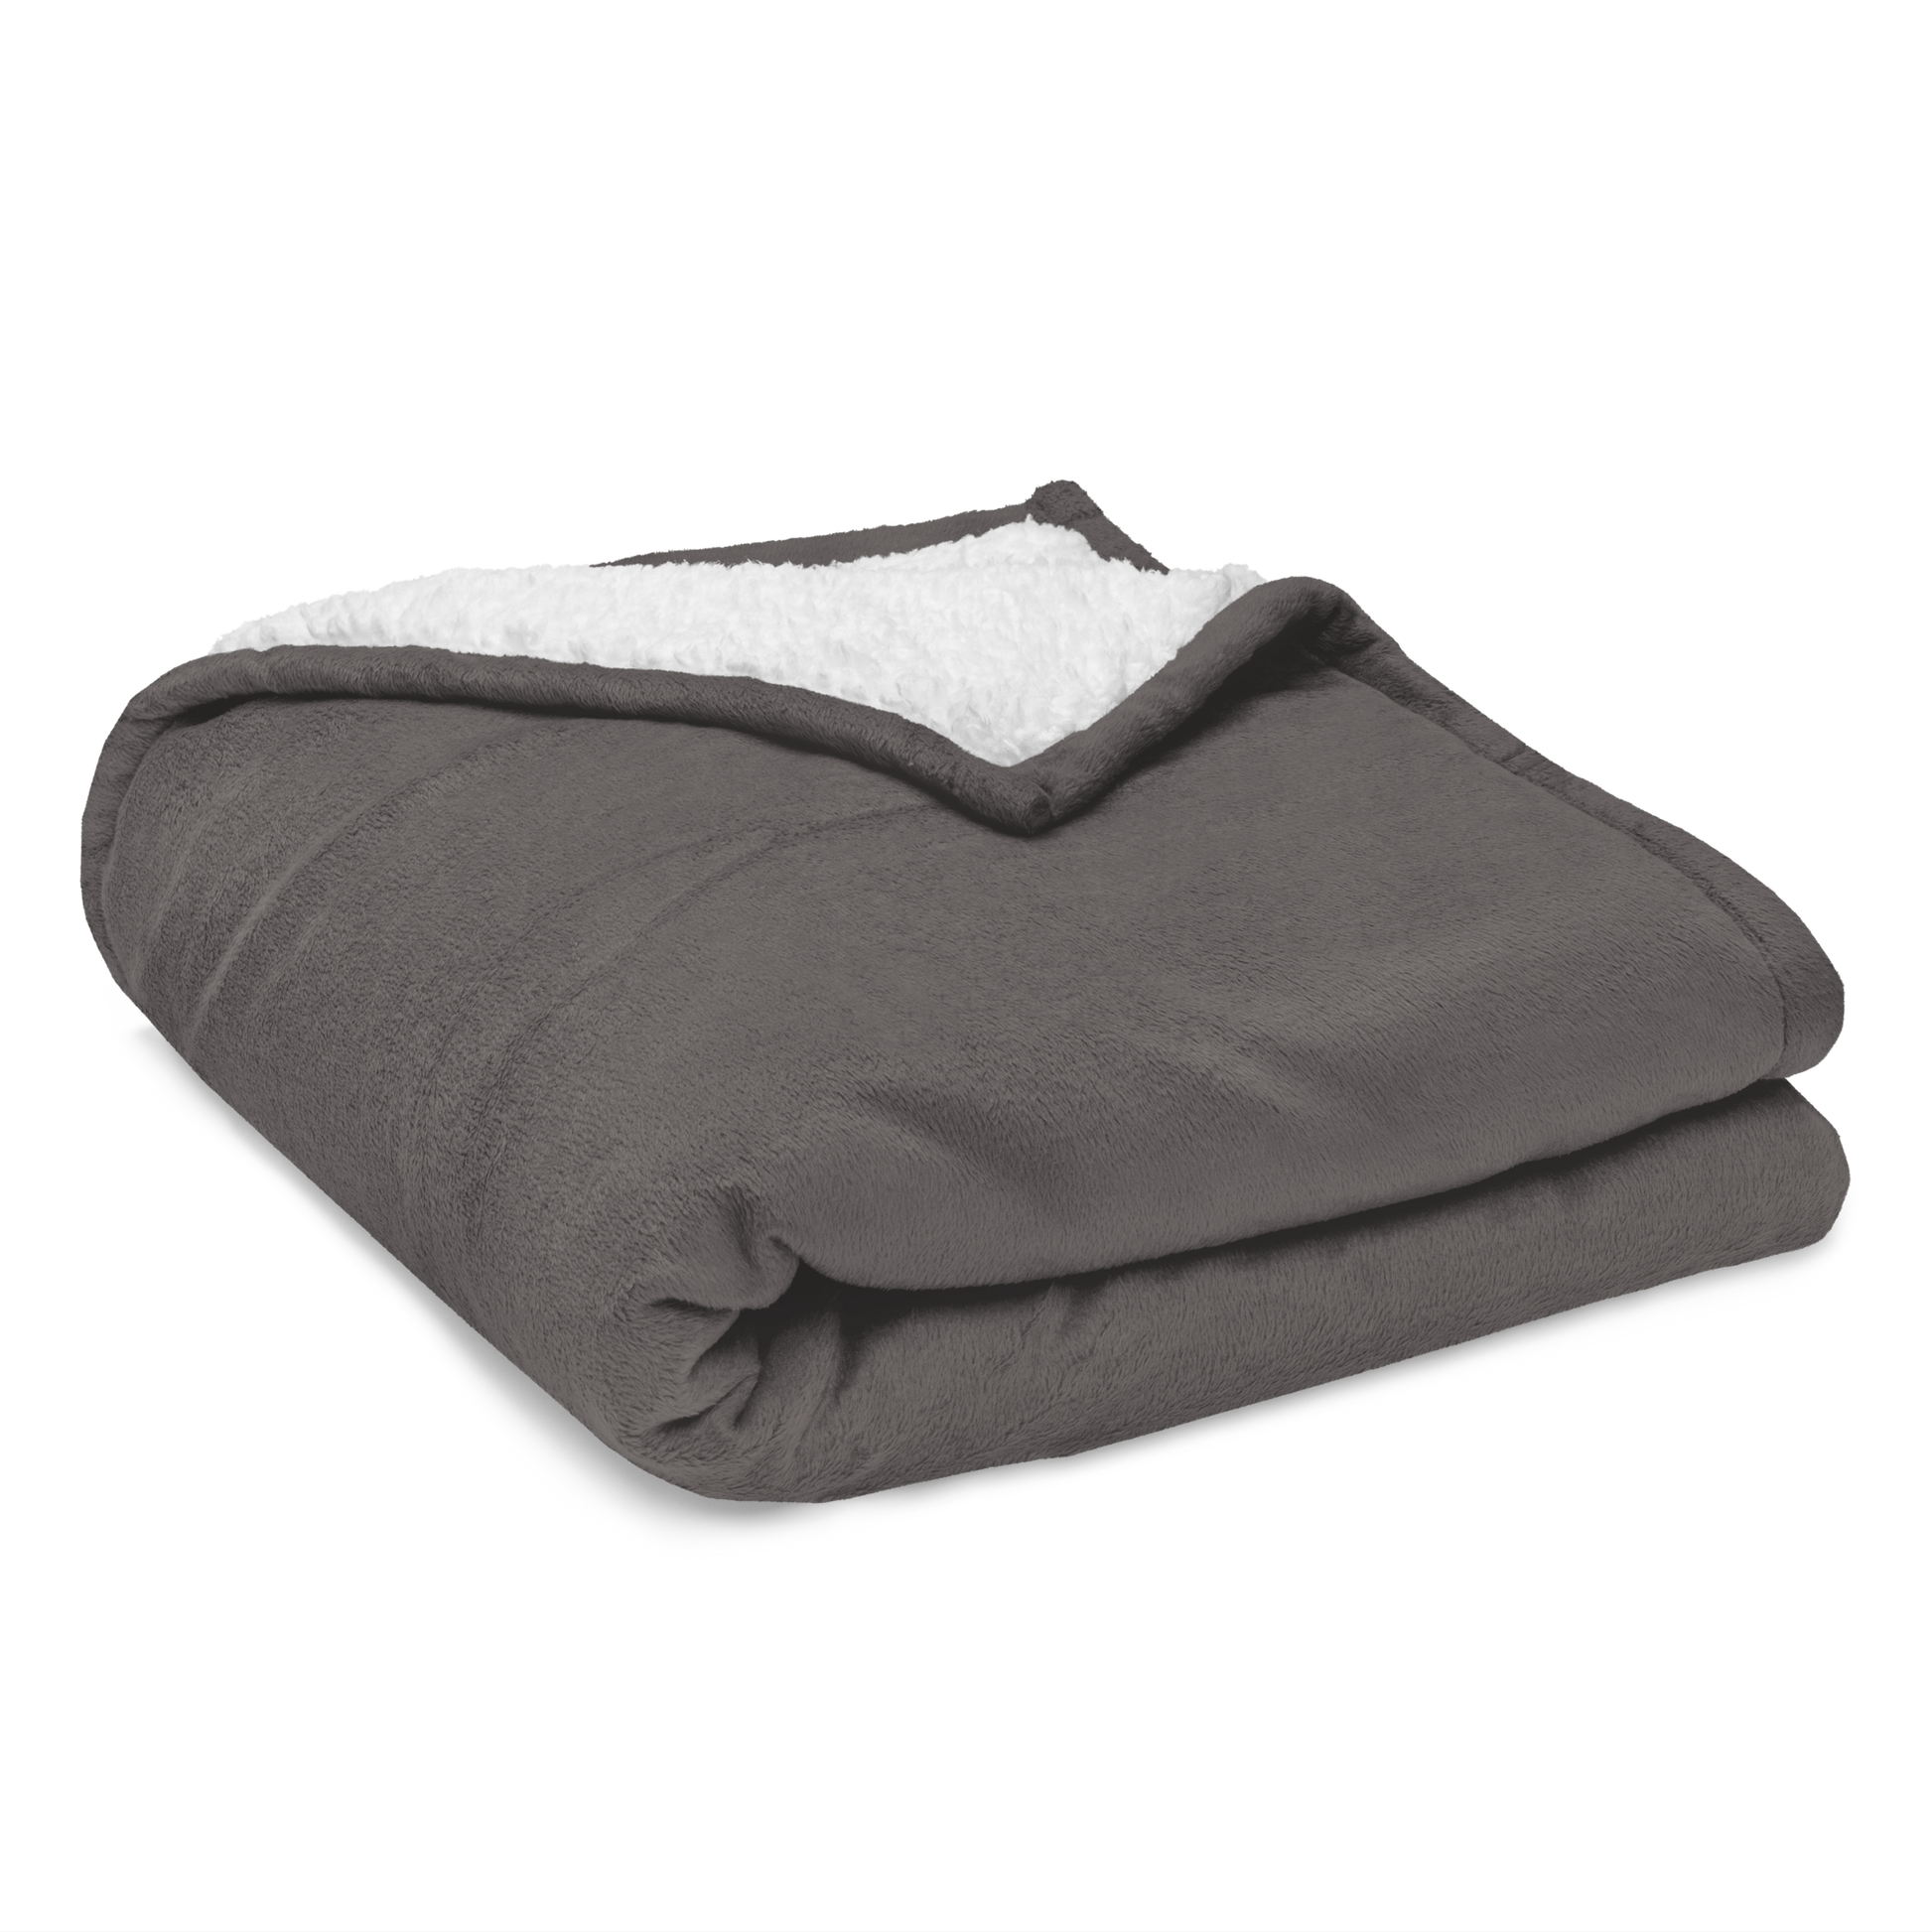 YHM Designs - YQR Regina Premium Sherpa Blanket - Crossed-X Design with Airport Code and Vintage Propliner - White Embroidery - Image 11